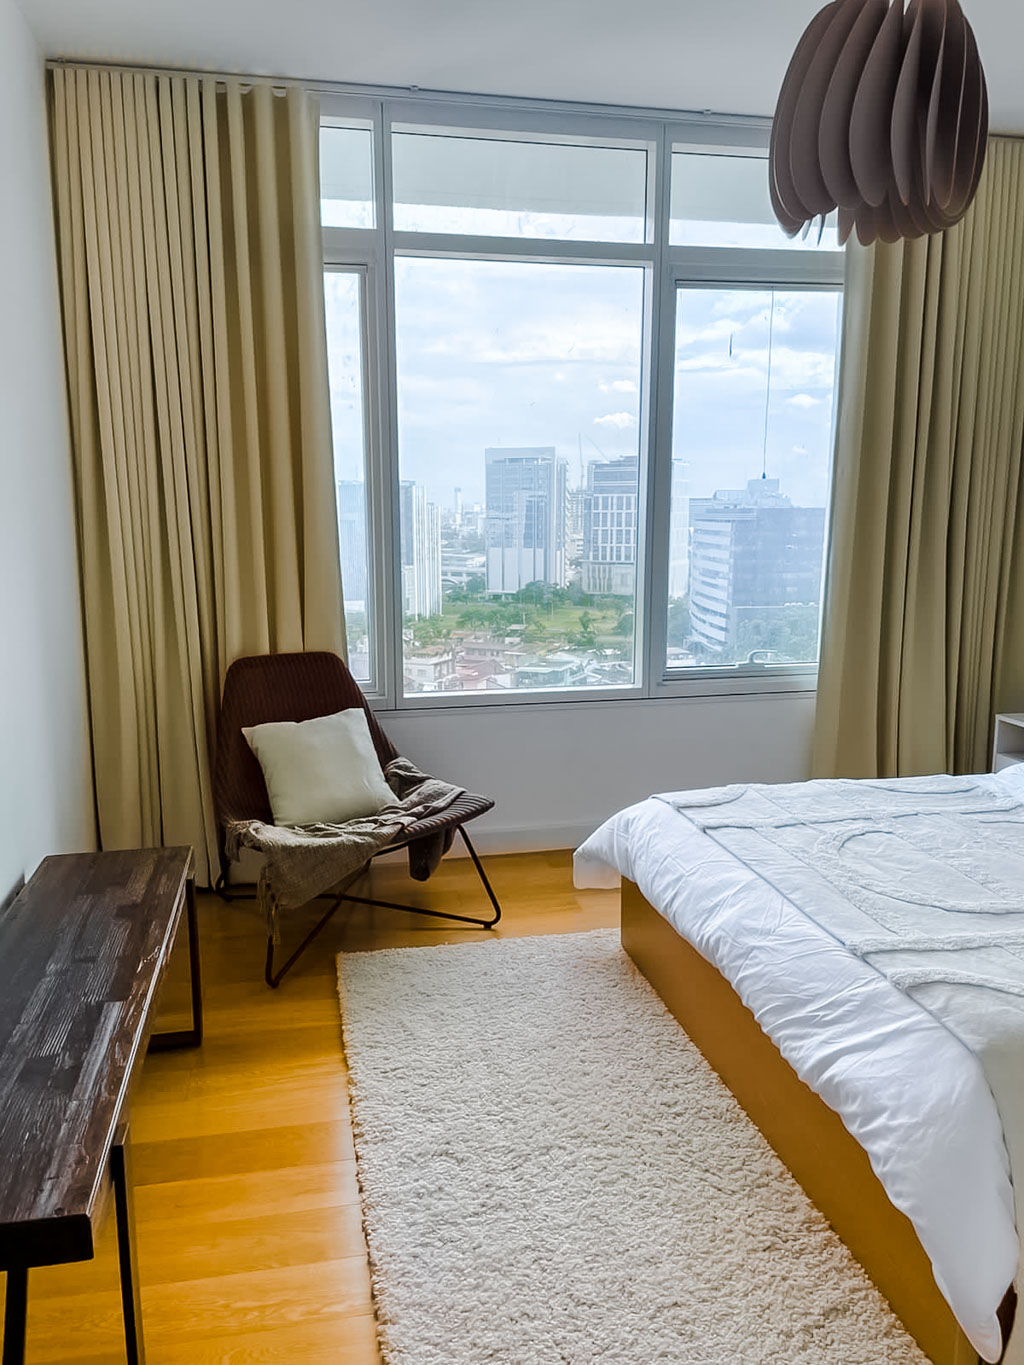 RCTS21 Furnished 2 Bedroom Condo for Rent in 1016 Residences - 11